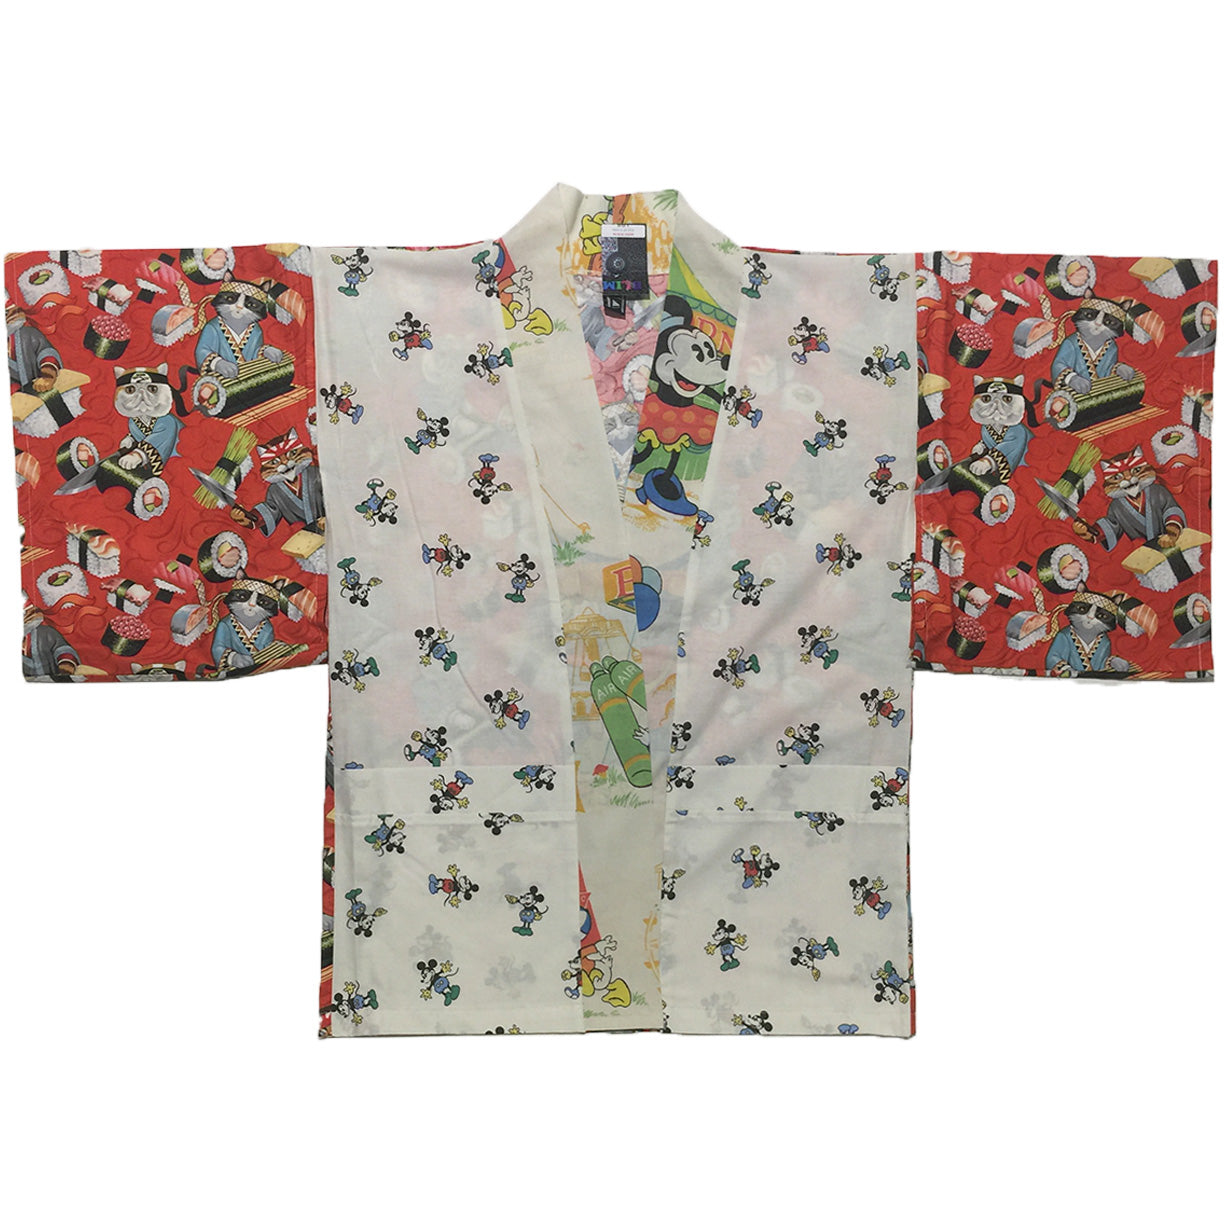 Sushi Cats and Mickey Mouse Haori